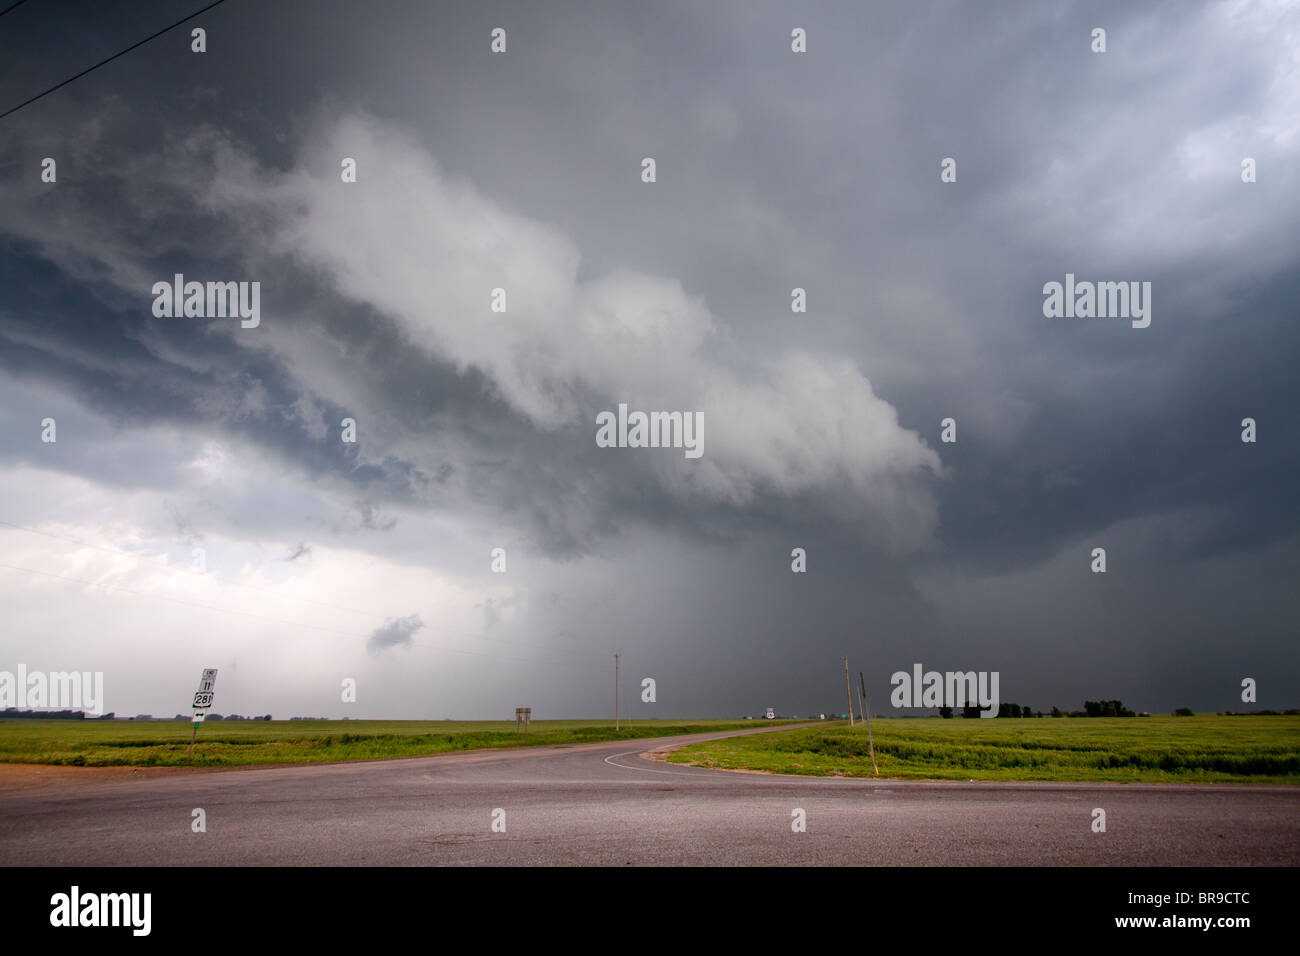 The updraft of a severe storm in northern Oklahoma, May 12, 2010. Stock Photo